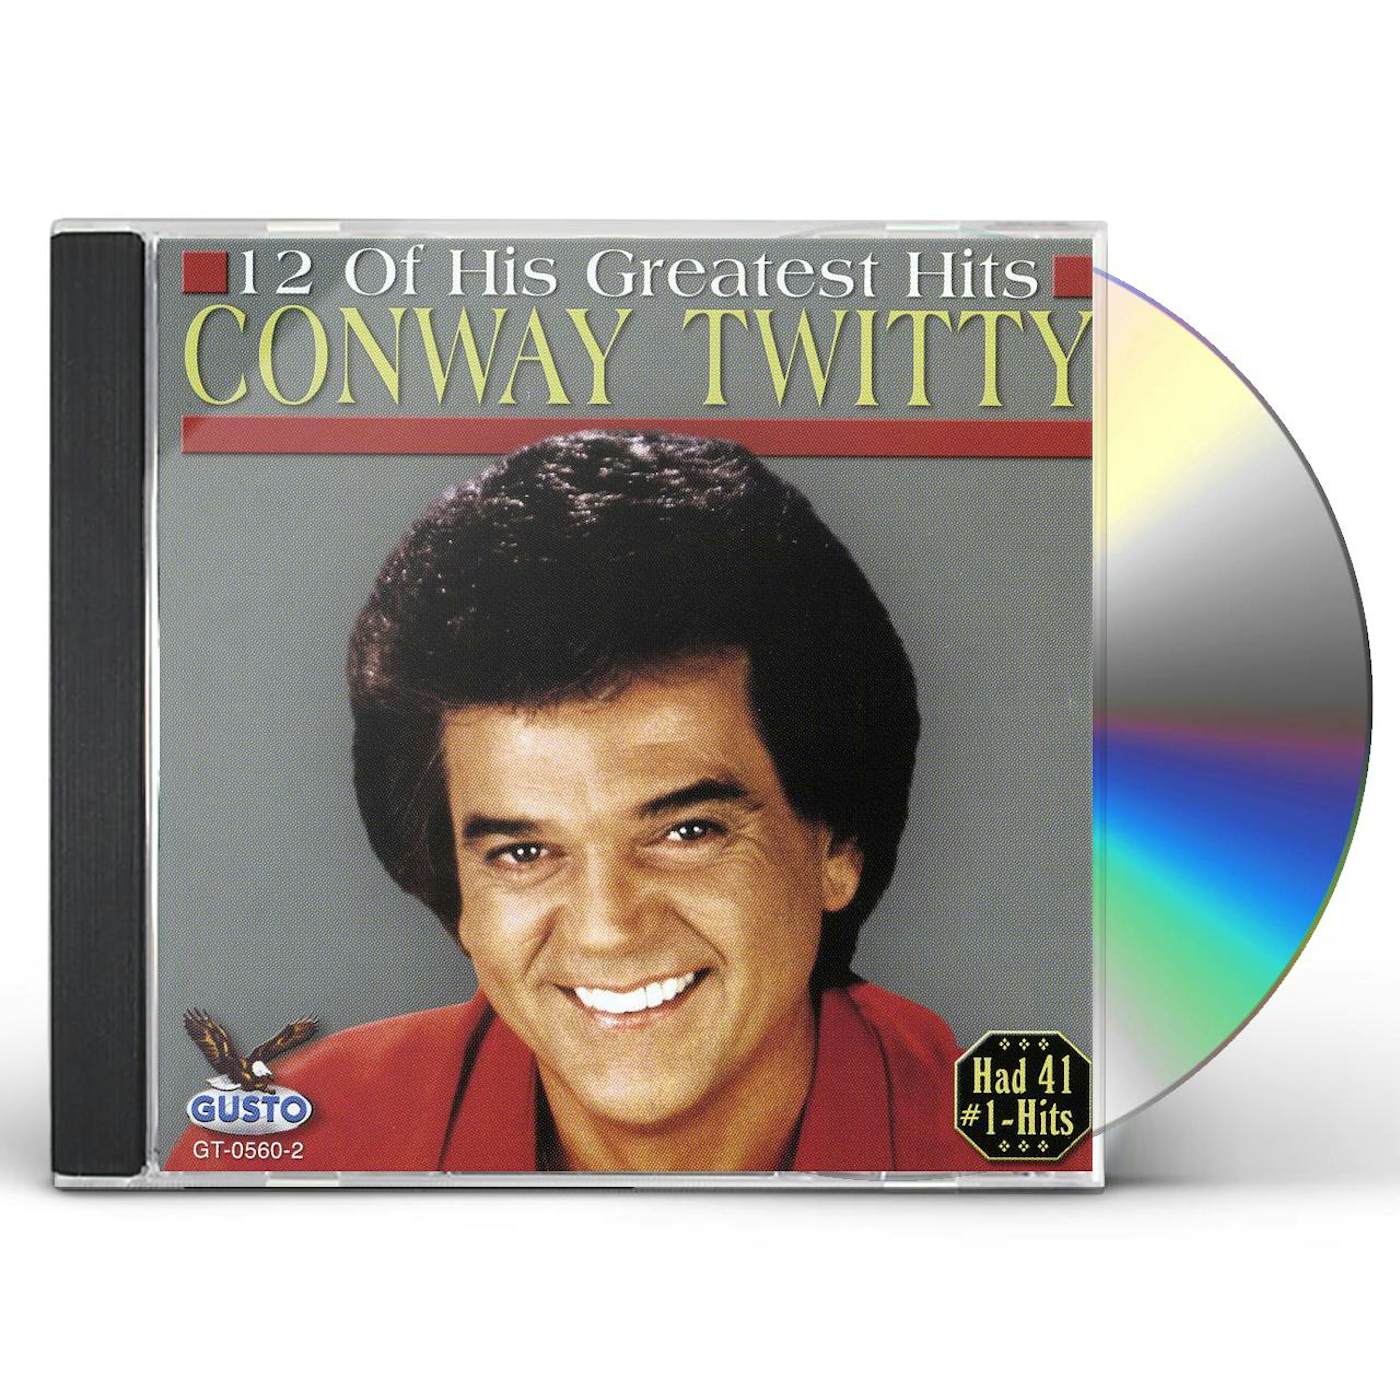 Conway Twitty 12 OF HIS GREATEST HITS CD